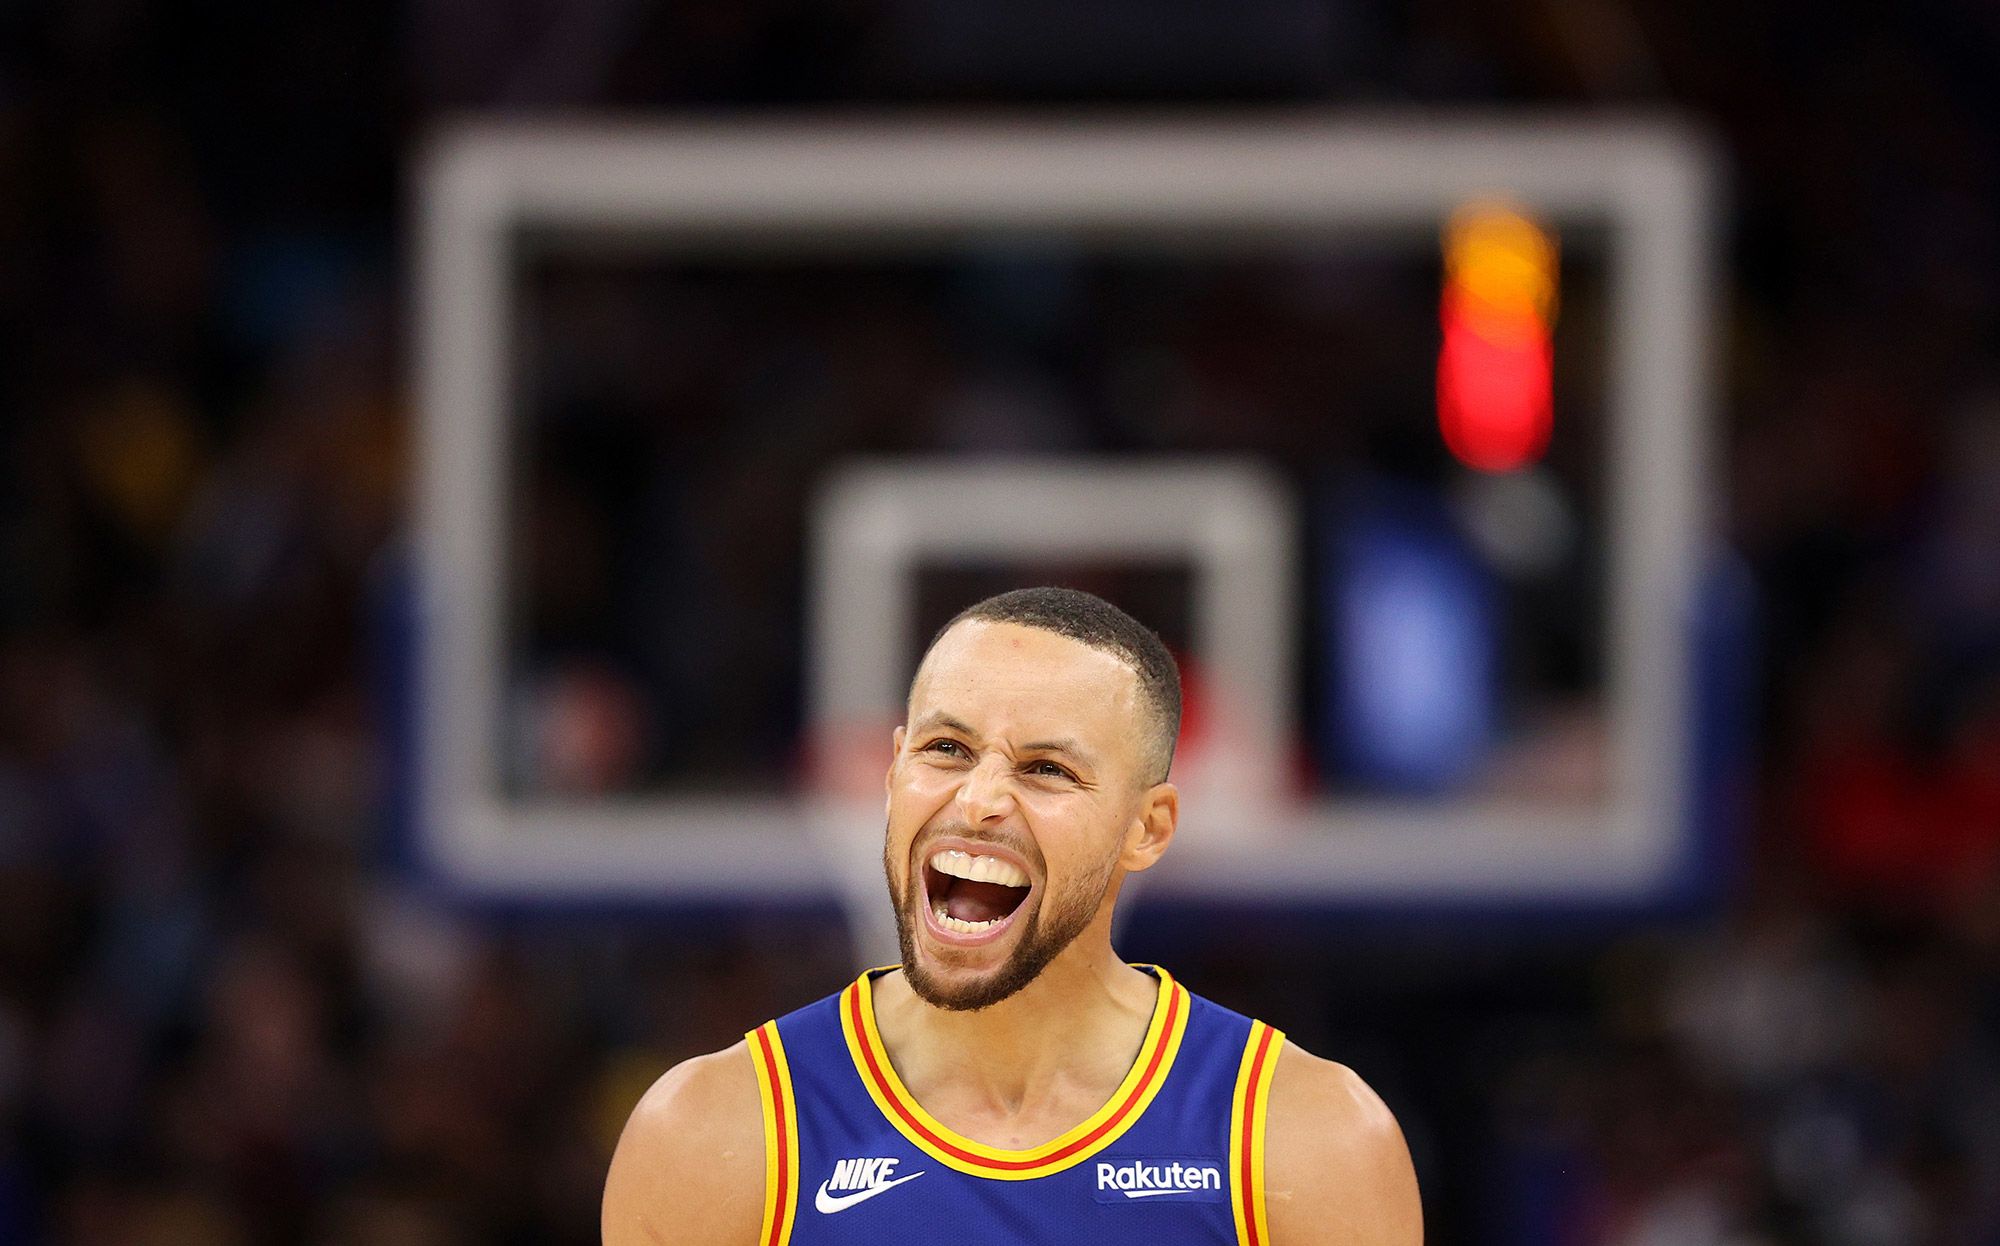 Steph Curry makes NBA history, passing Ray Allen for most three